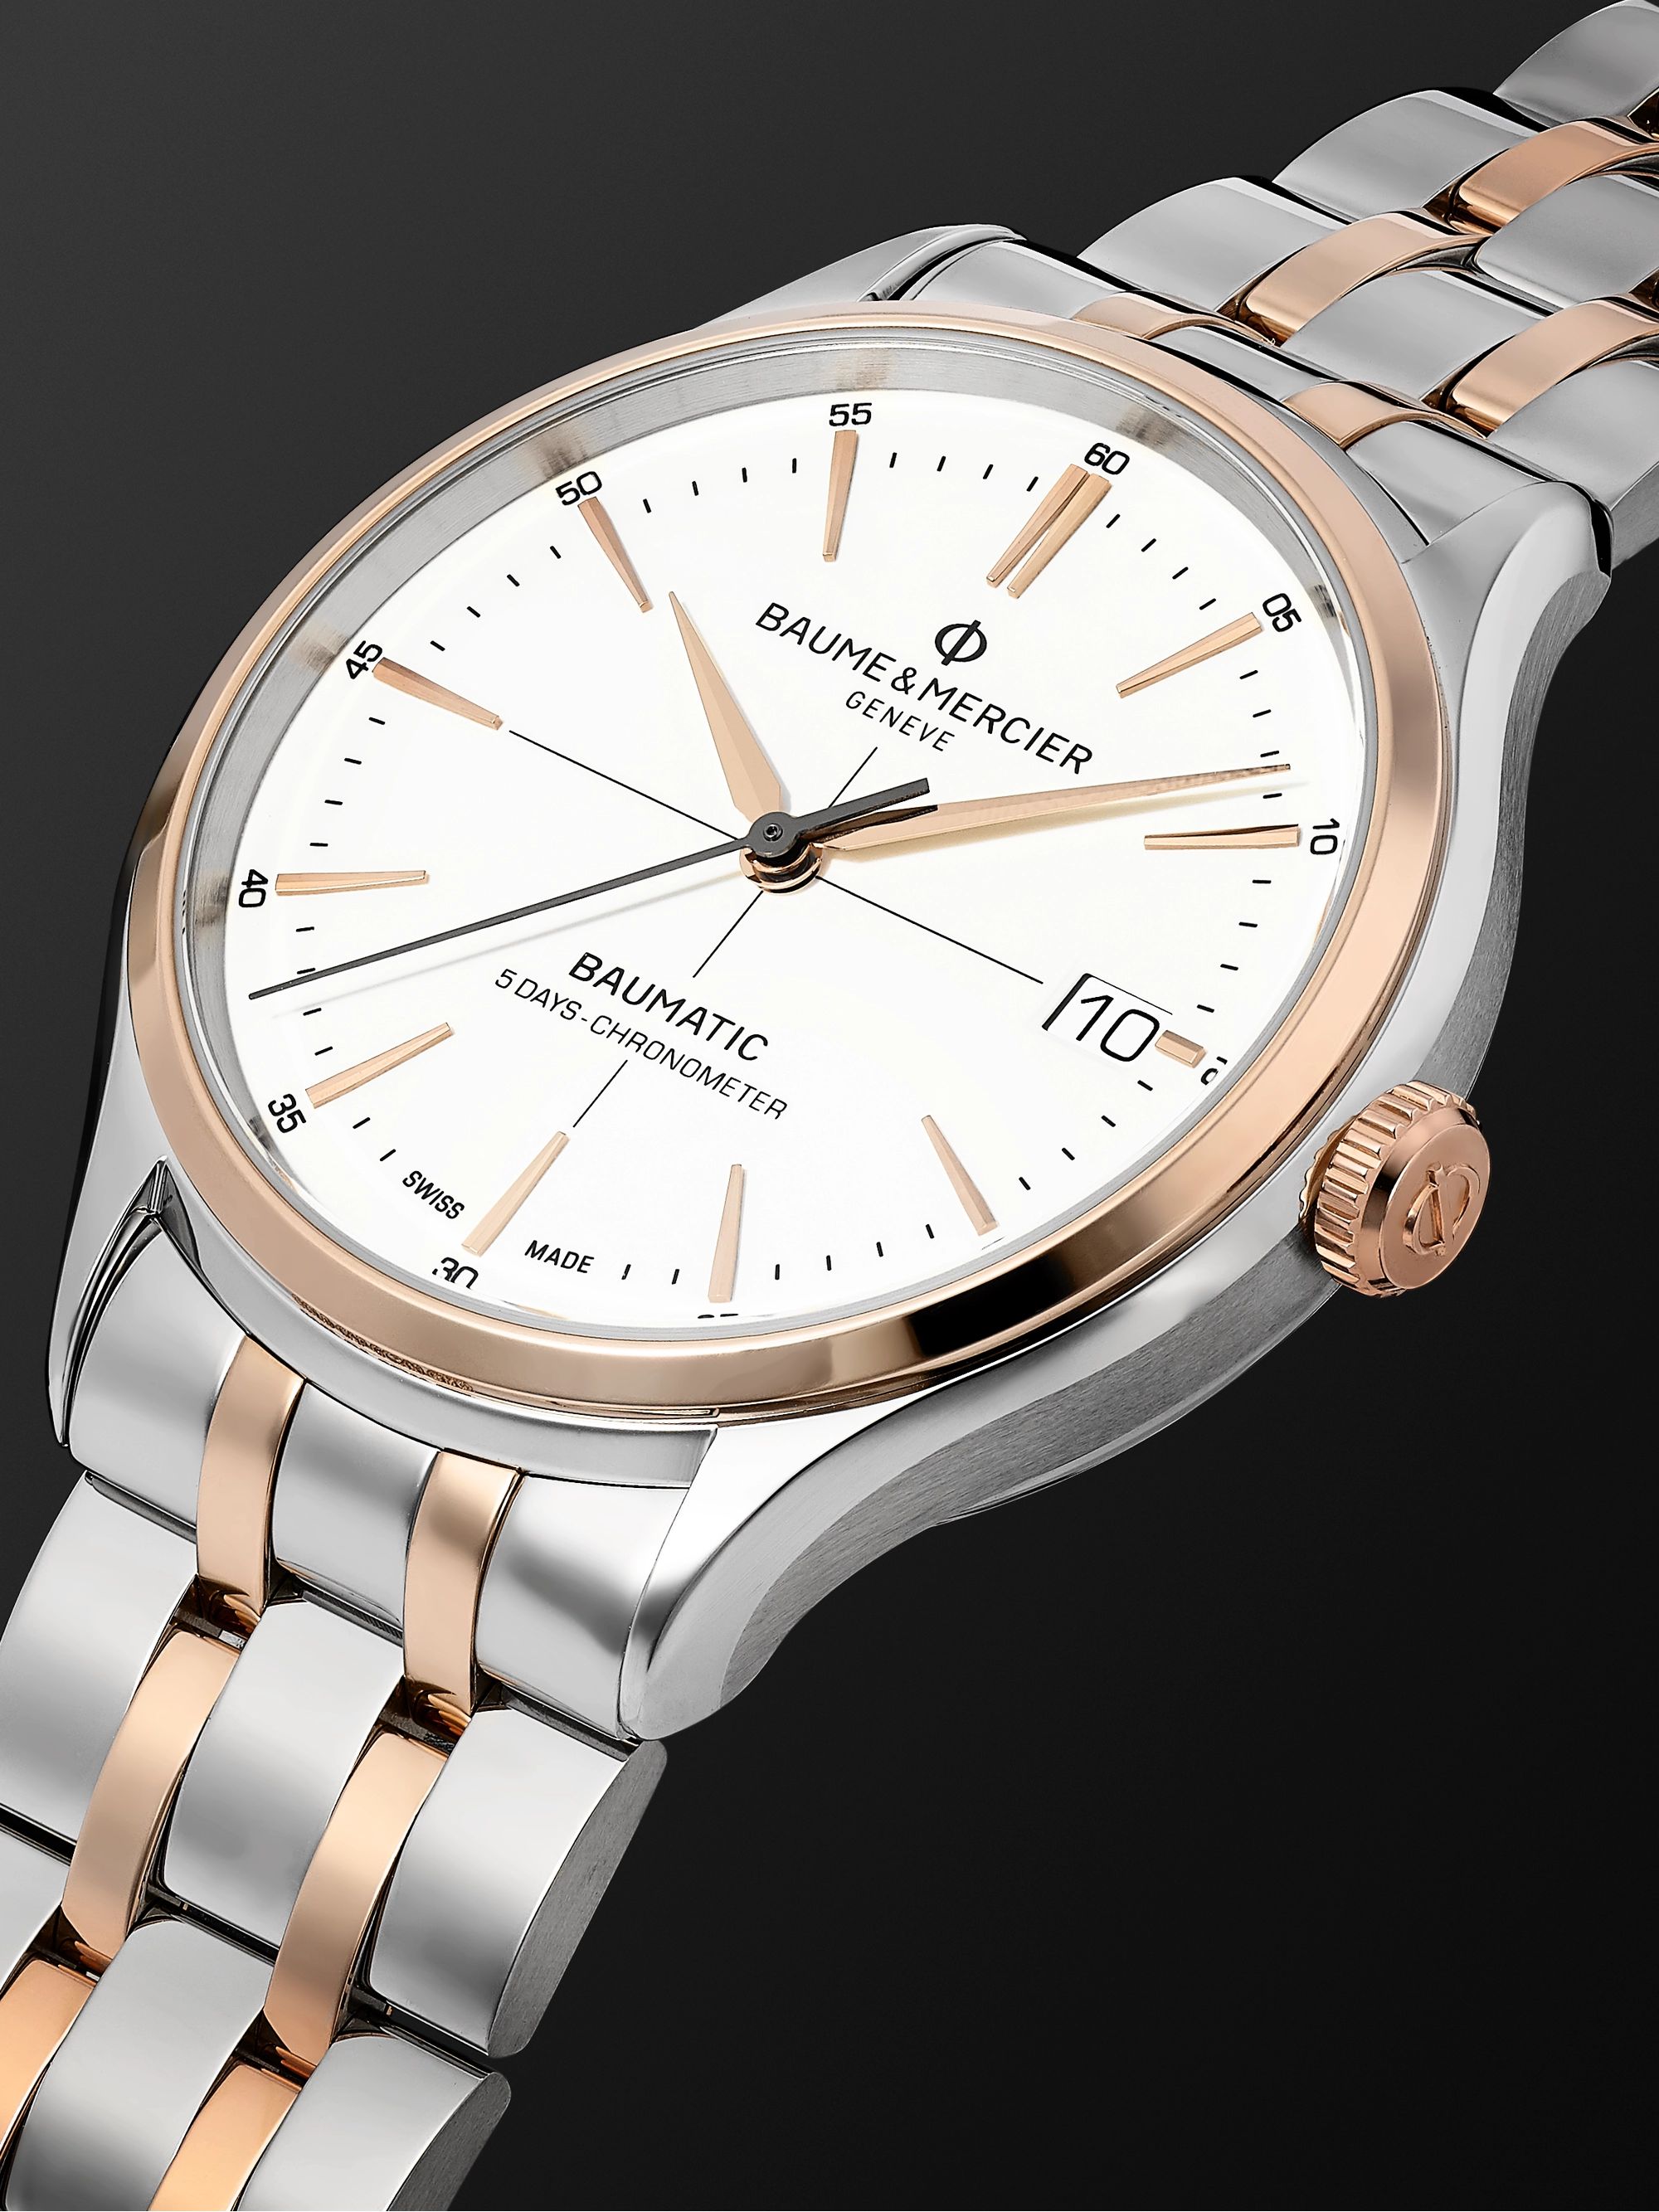 BAUME & MERCIER Clifton Baumatic Automatic Chronometer 40mm Stainless Steel and 18-Karat Rose Gold-Capped Watch, Ref. No. M0A10458